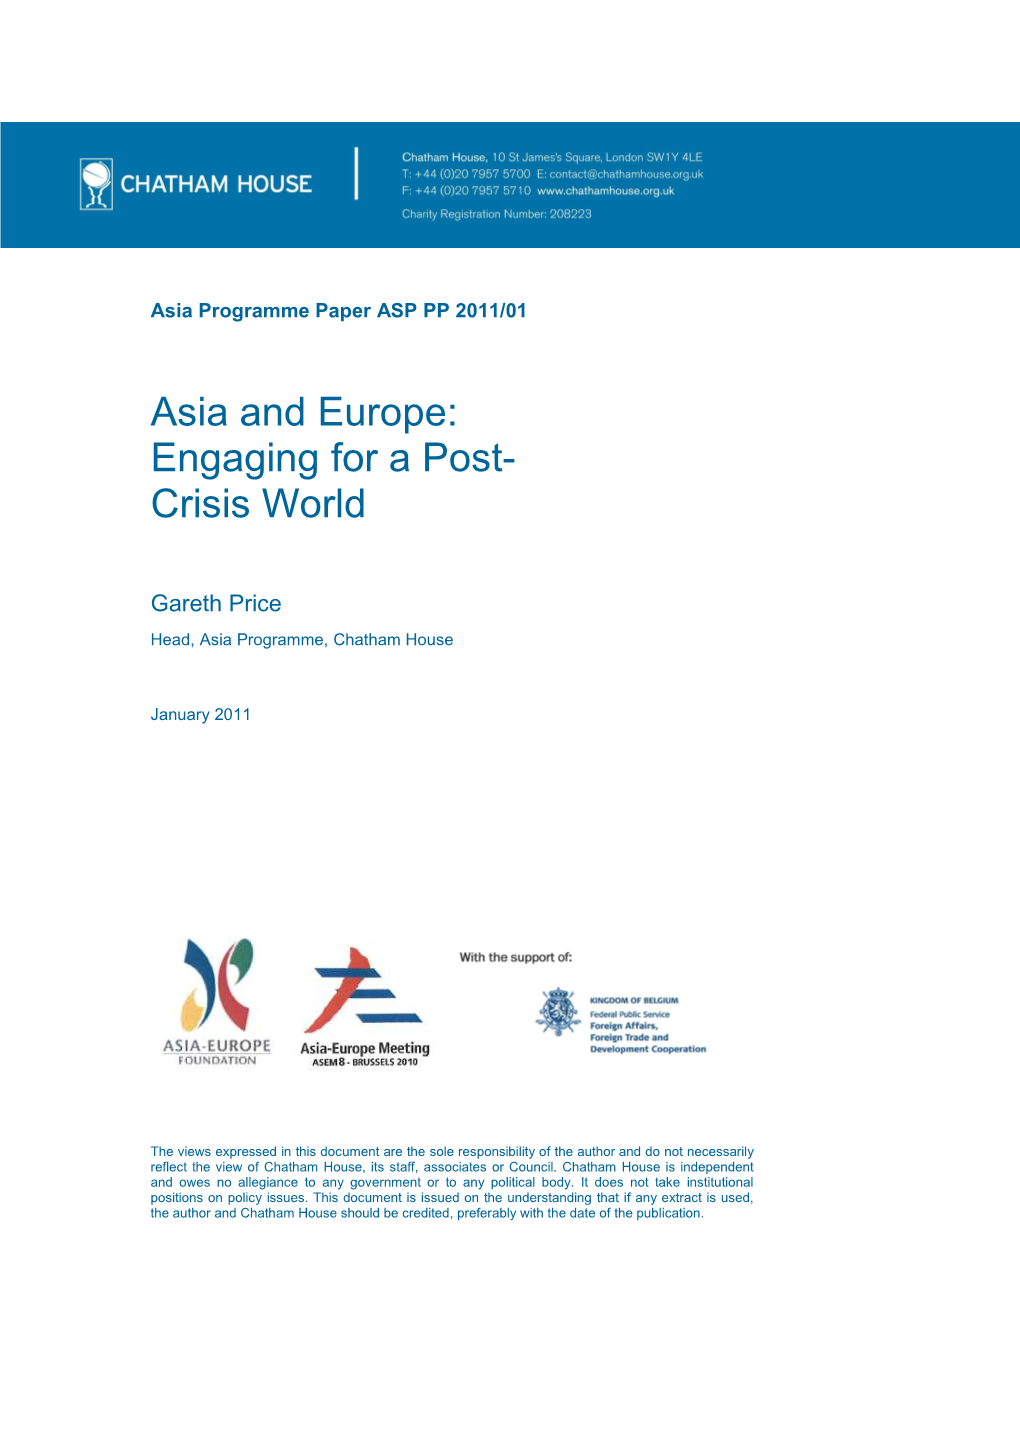 Asia and Europe: Engaging for a Post- Crisis World